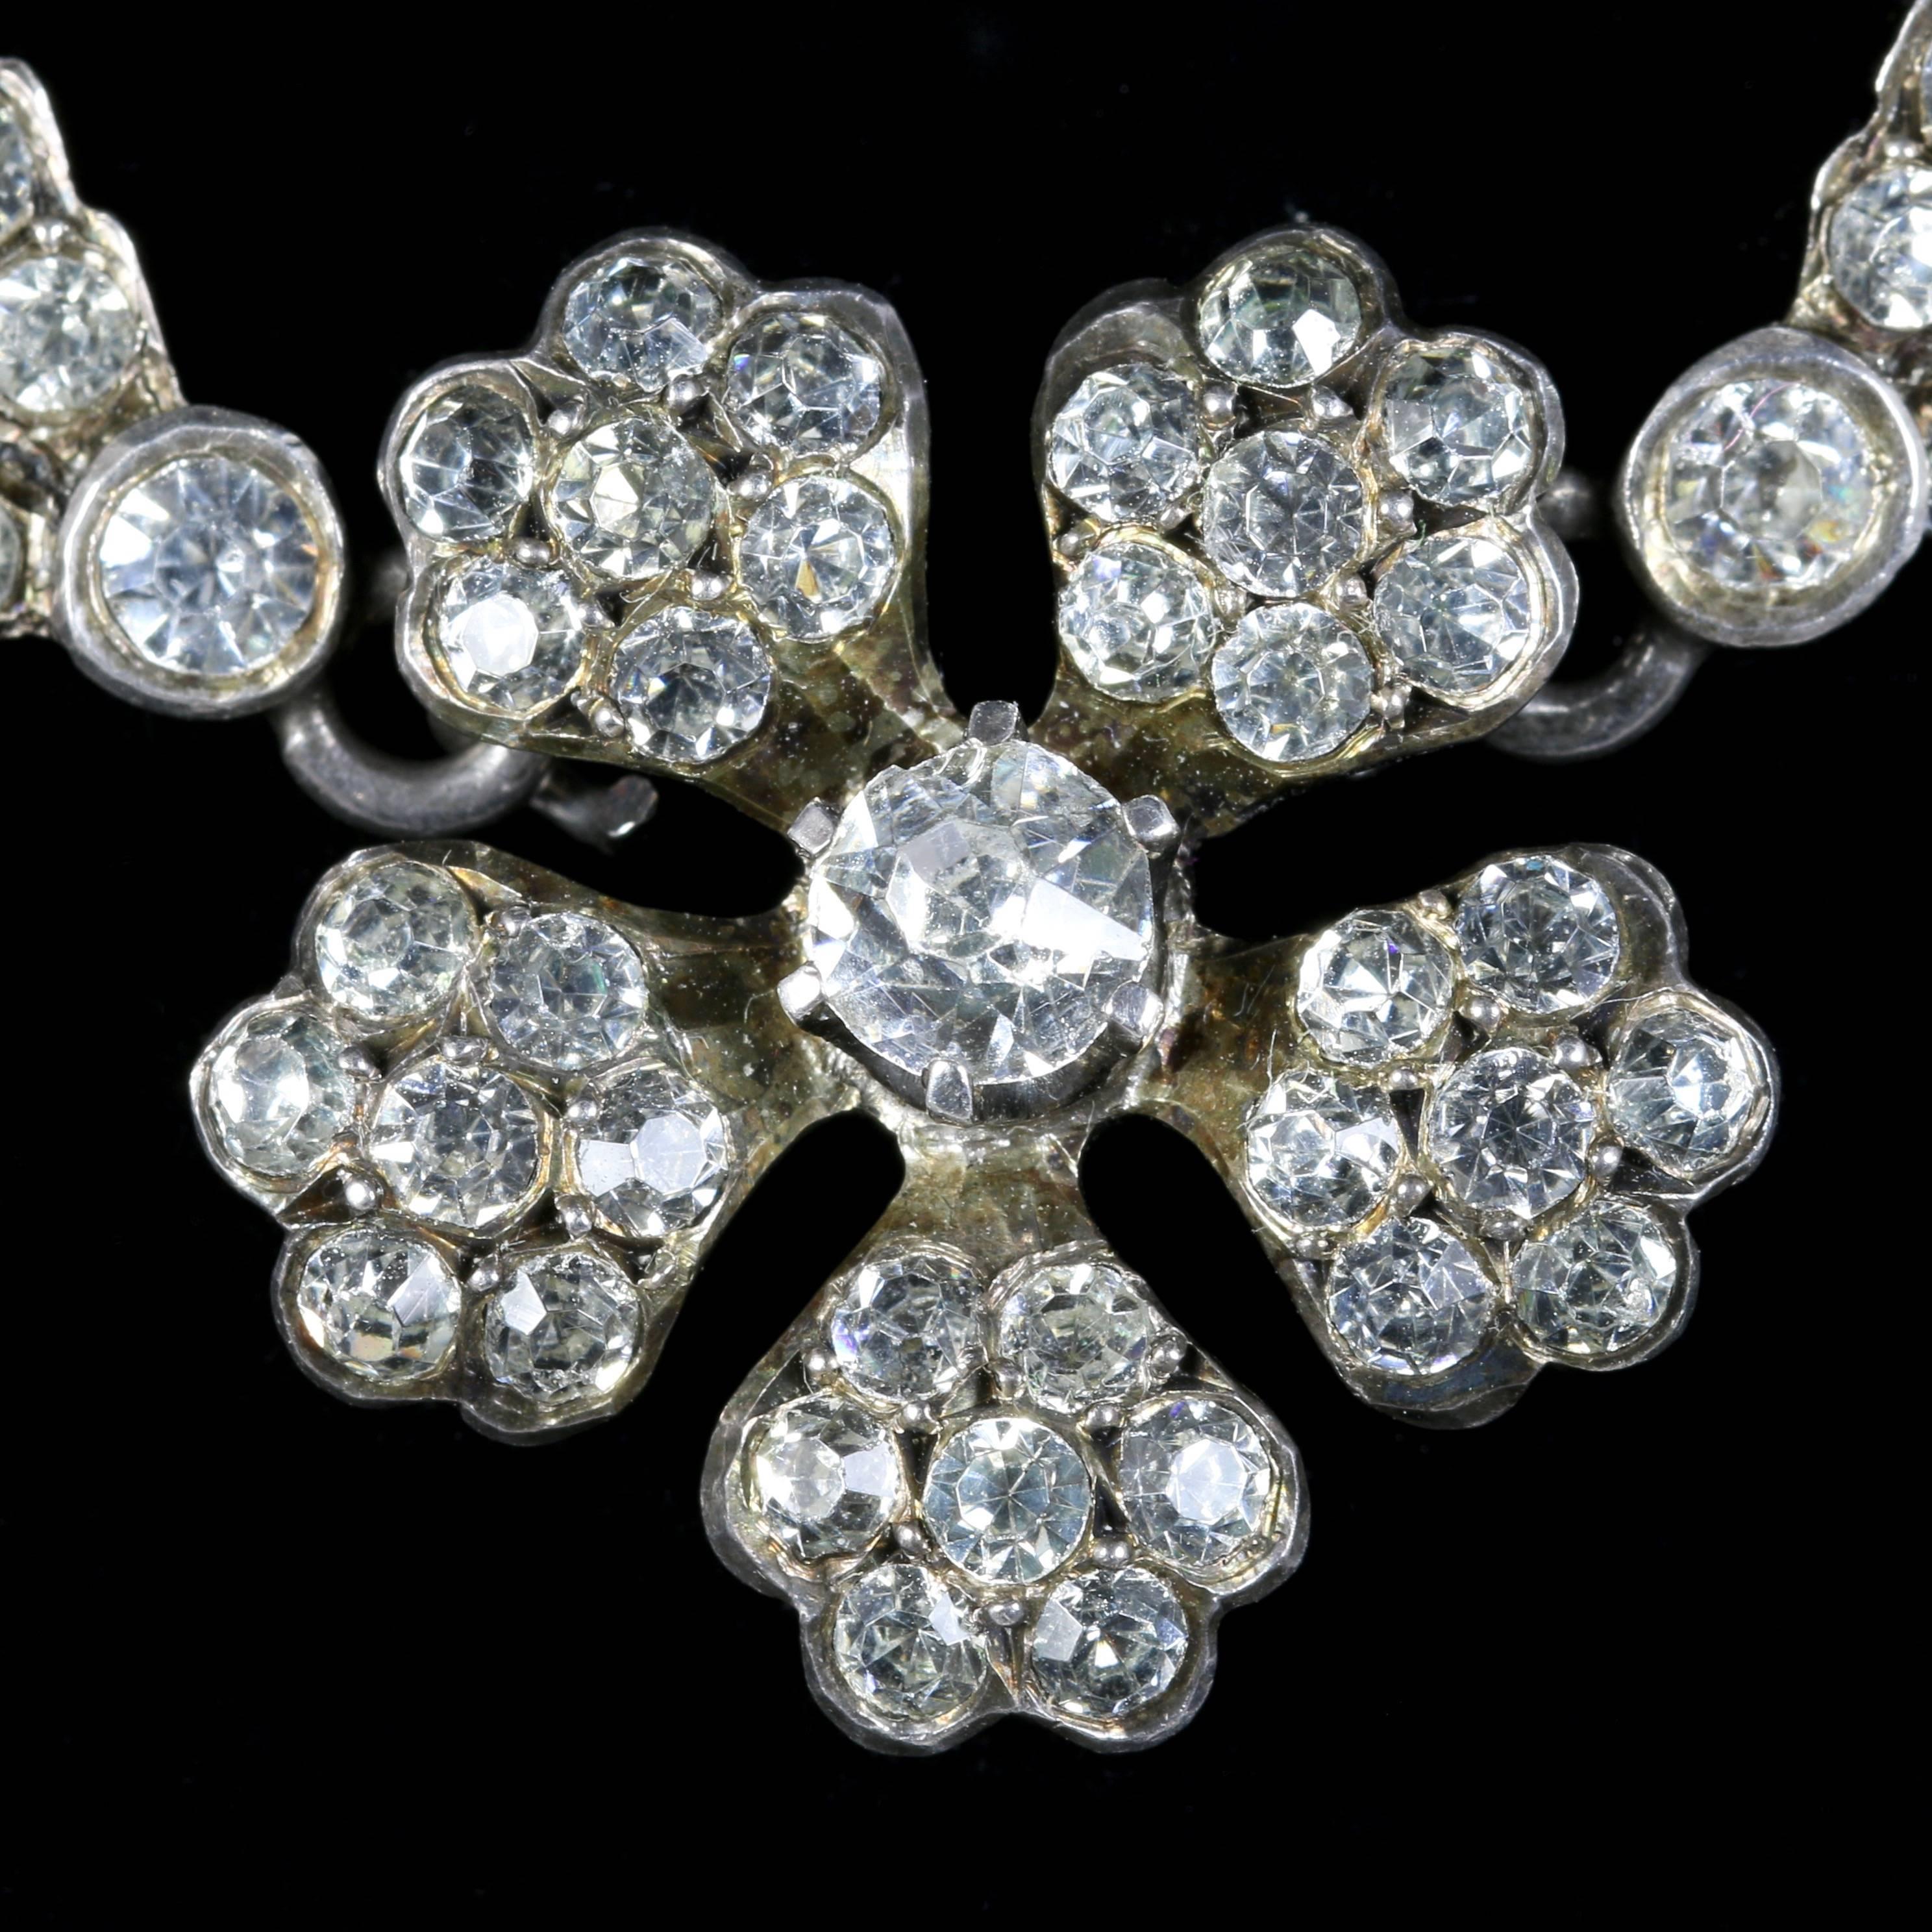 This spectacular Sterling Silver Antique Victorian Paste necklace is Circa 1810.

Steeped in English history, purchased in London.

This fabulous Necklace is set with sparkling Paste stones that lead to a floral central pendant.

Paste jewellery was